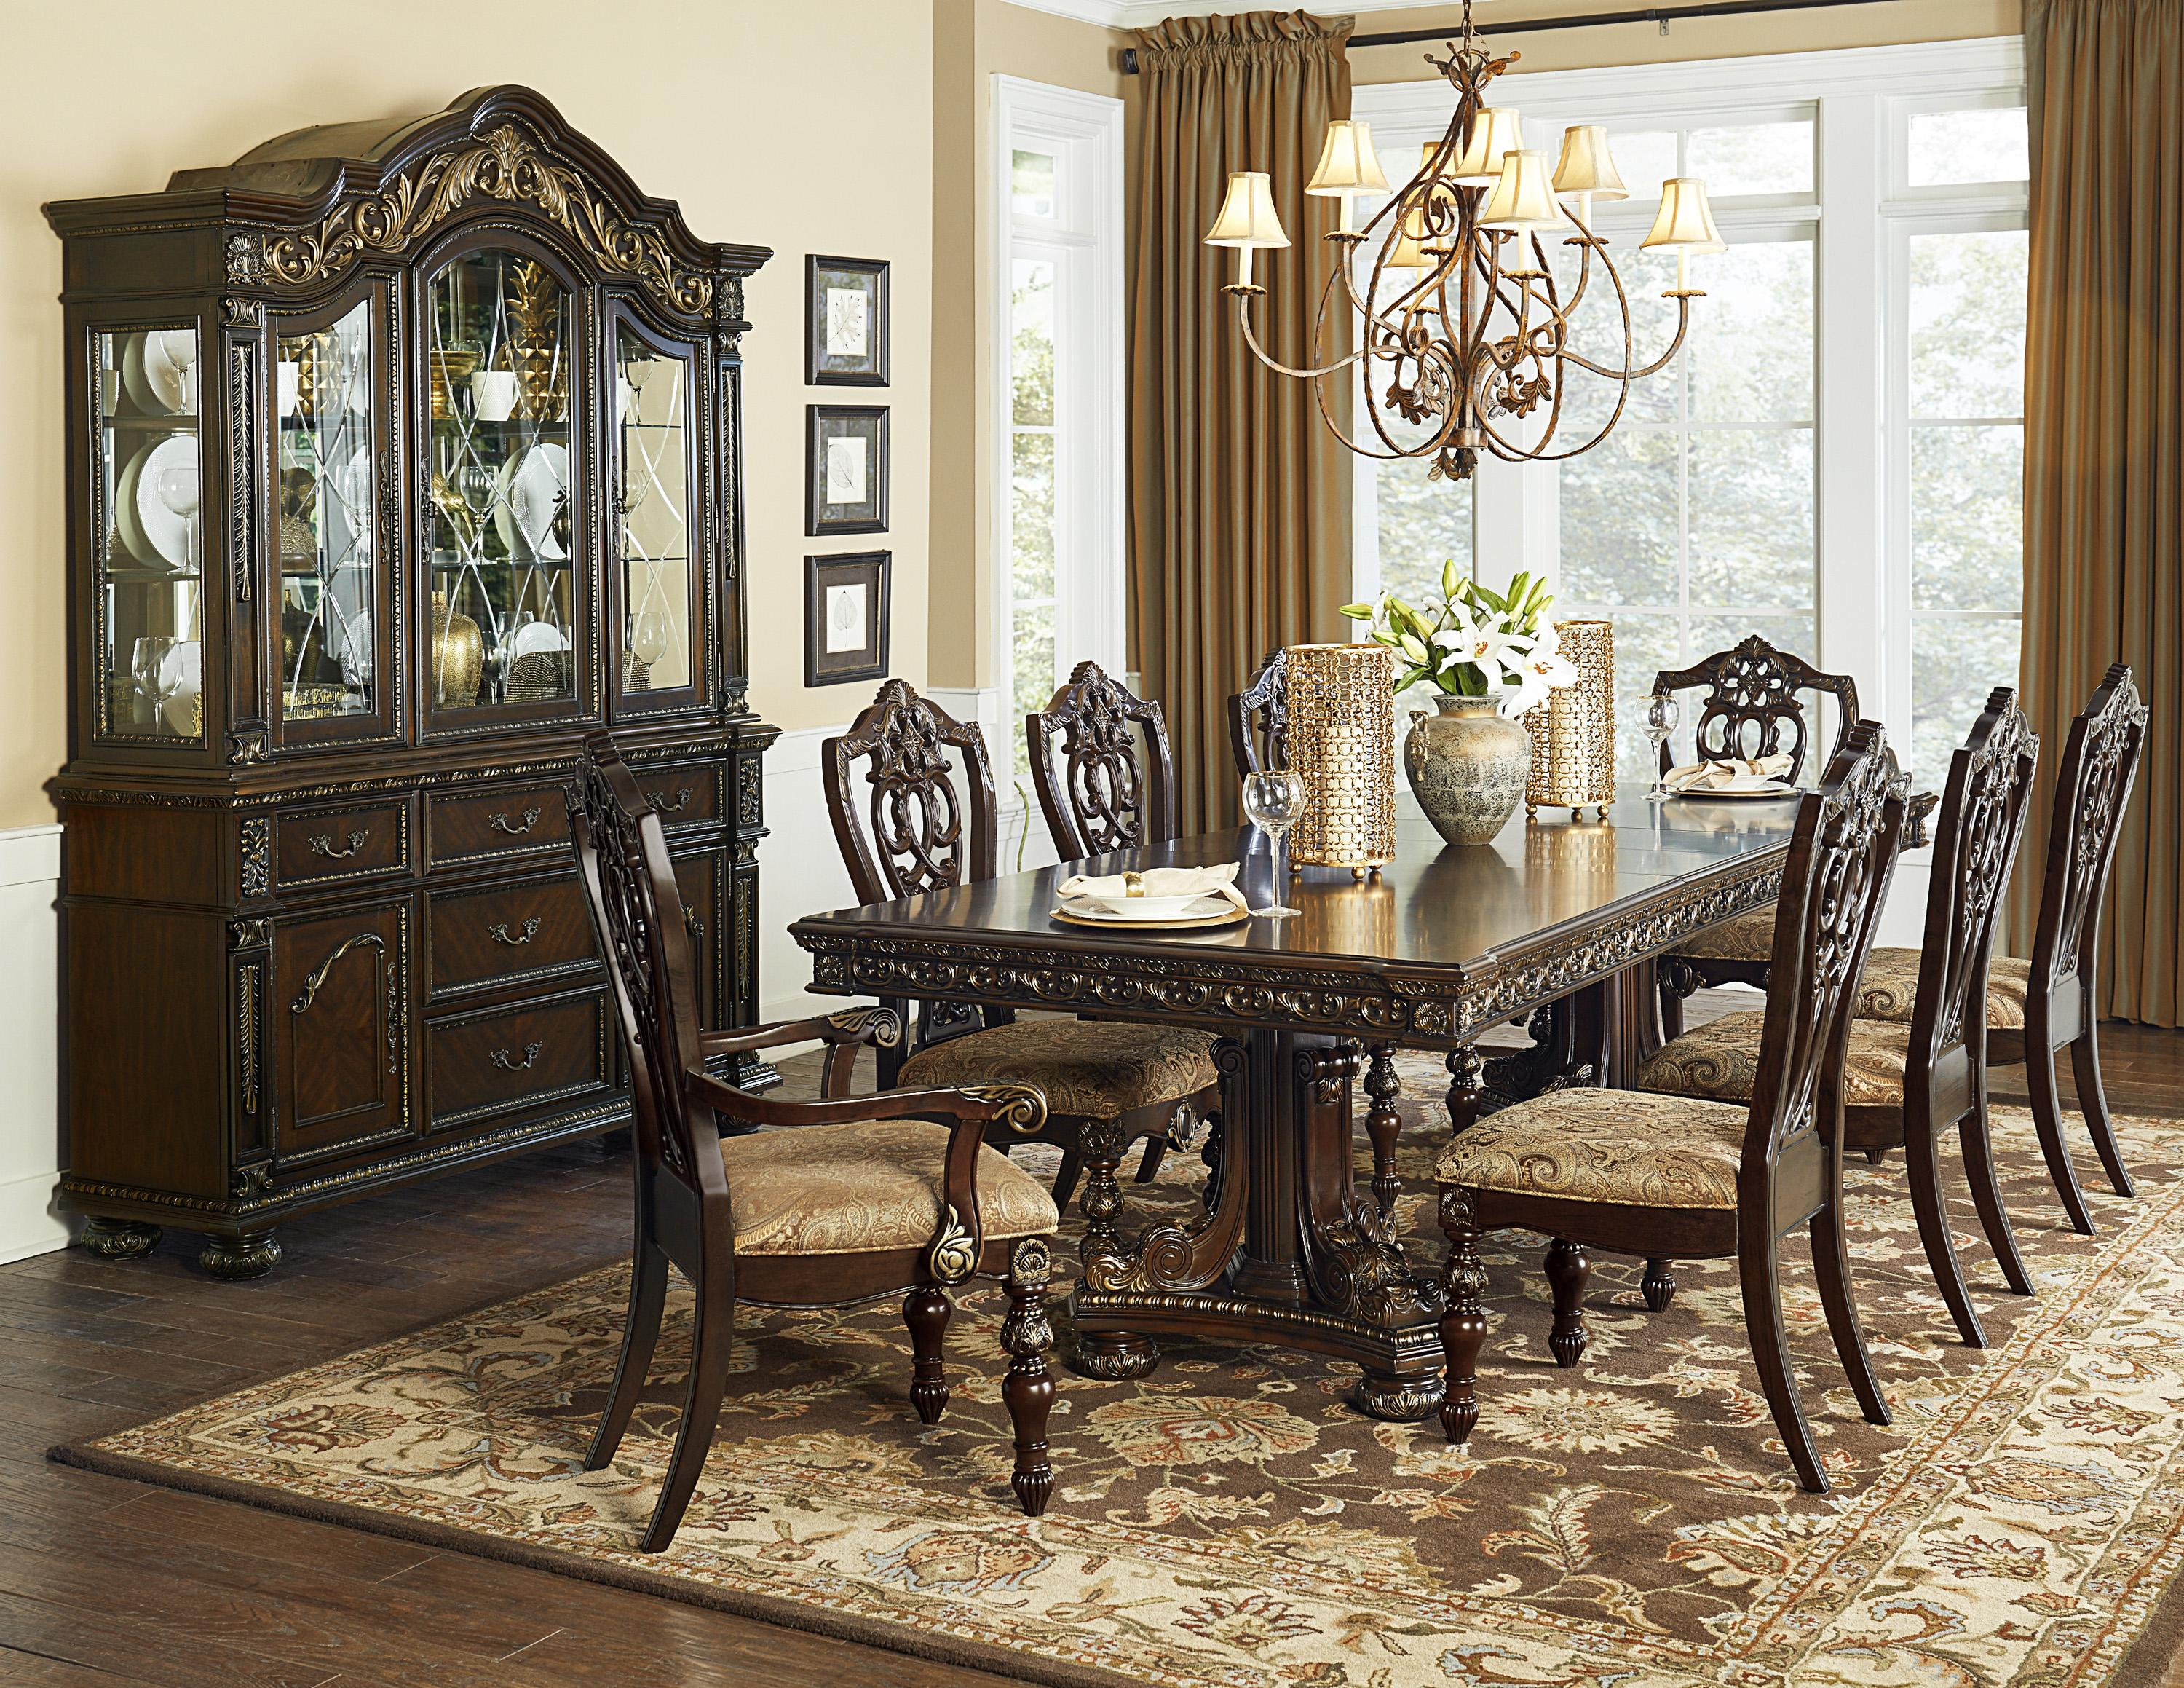 Traditional Dining Room Set 1824-112*9PC Catalonia 1824-112*9PC in Dark Cherry Polyester